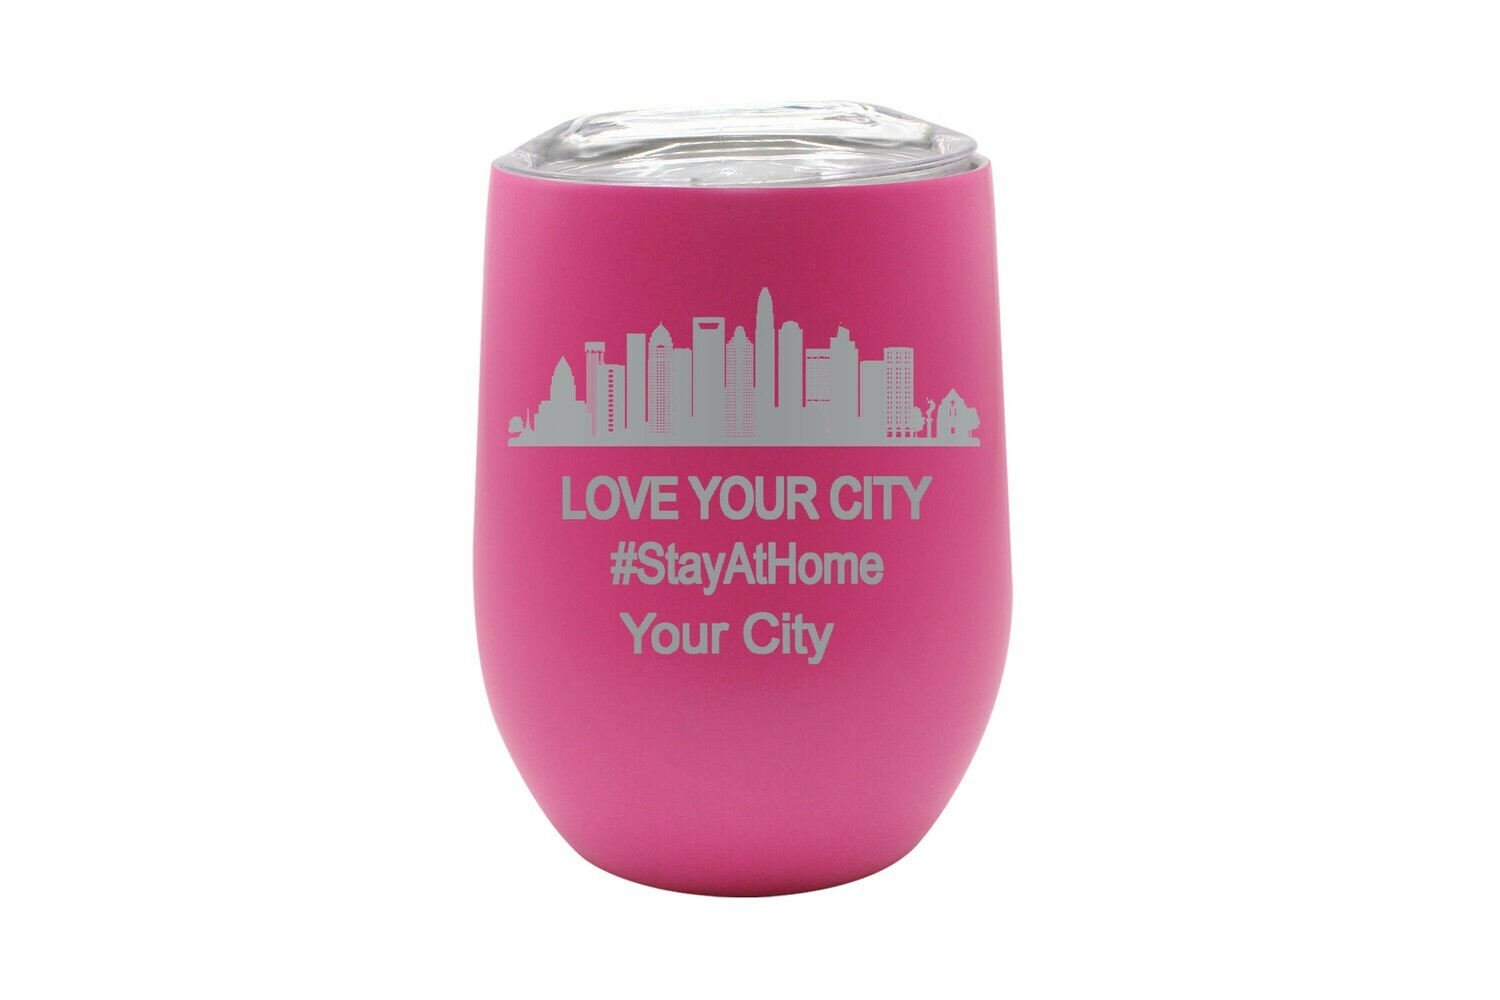 Love Your City/Community (Stayathome/Alonetogether) Insulated Tumbler 12 oz